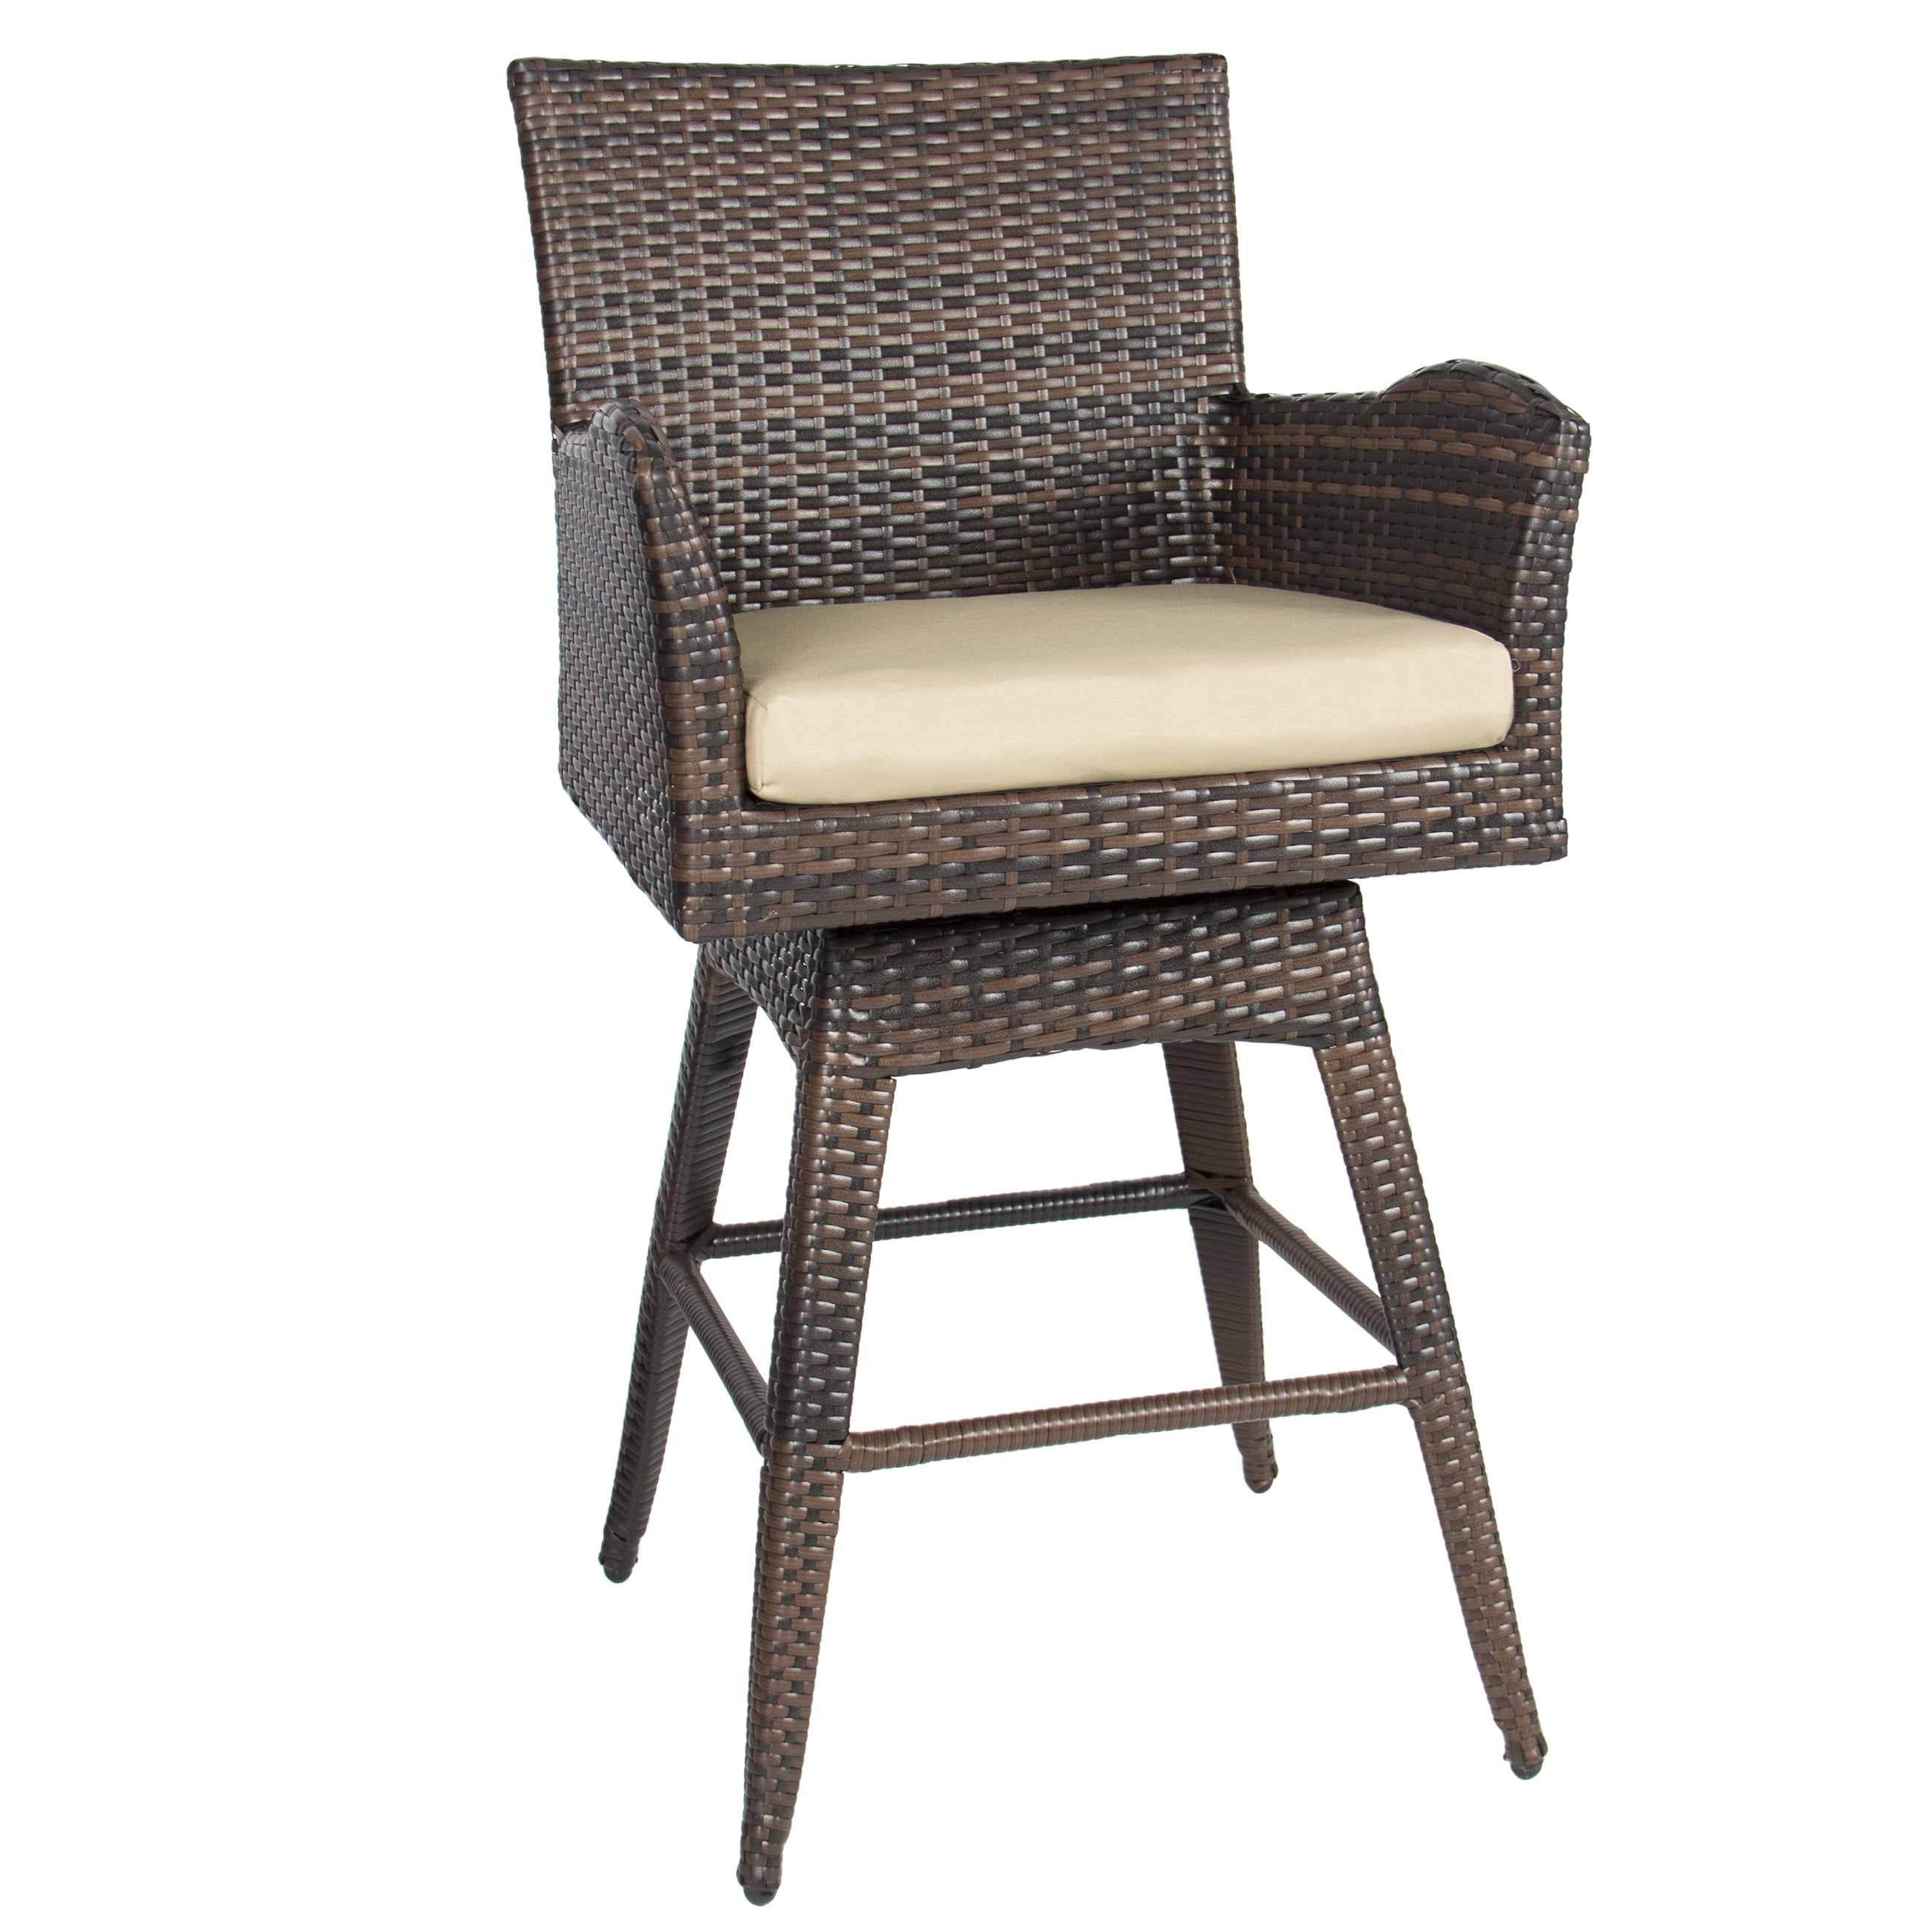 Best Choice Products Outdoor Brown Wicker Swivel Bar Stool W Cushion